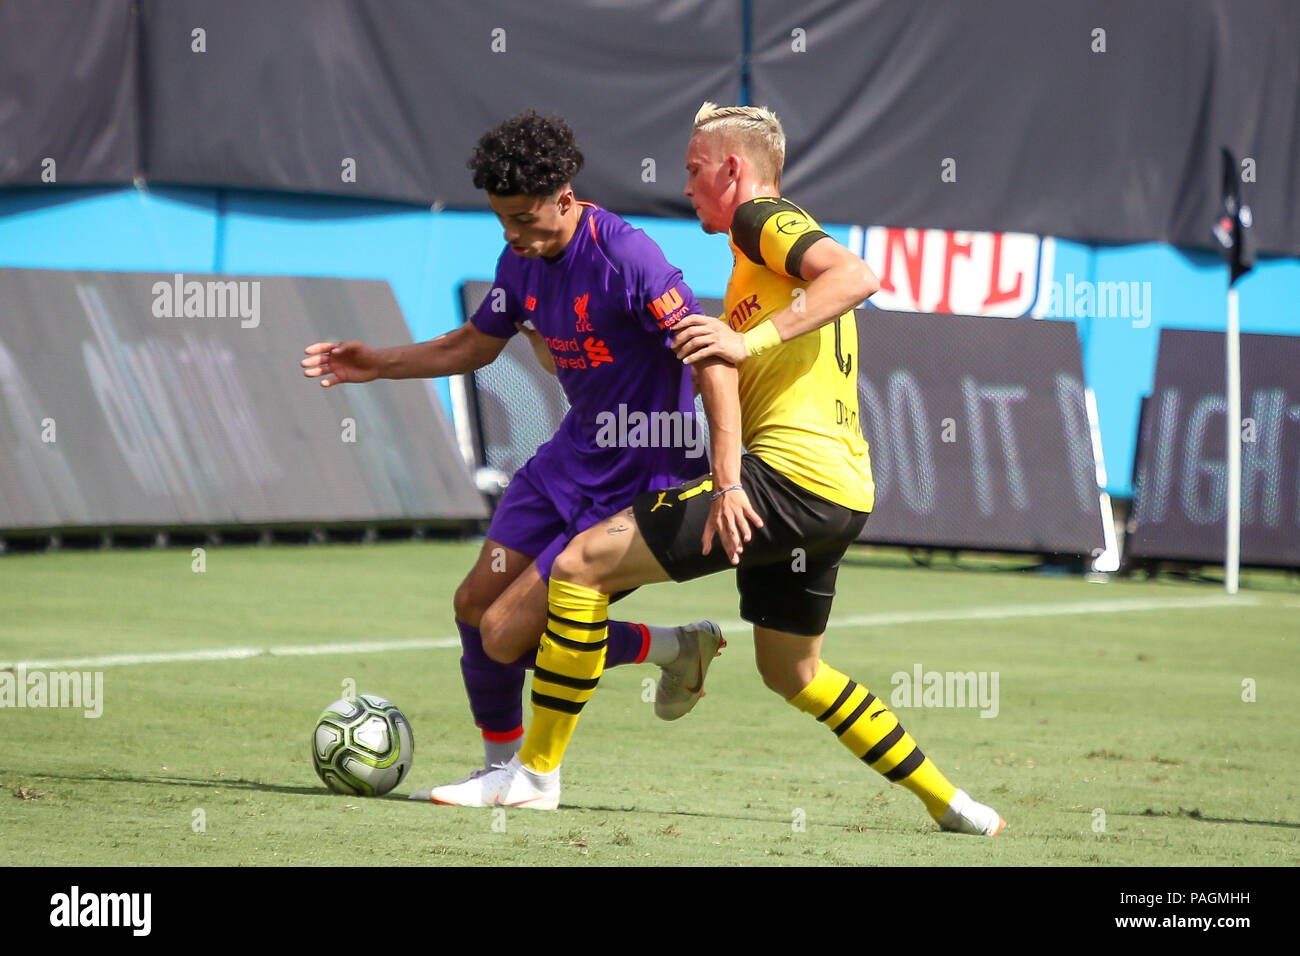 Charlotte, North Carolina, USA. 22nd July, 2018. Game action during an International Champions Cup match at Bank of America Stadium in Charlotte, NC. Borussia Dortmund of the German Bundesliga beat Liverpool of the English Premier League 3 to 1. Credit: Jason Walle/ZUMA Wire/Alamy Live News Stock Photo